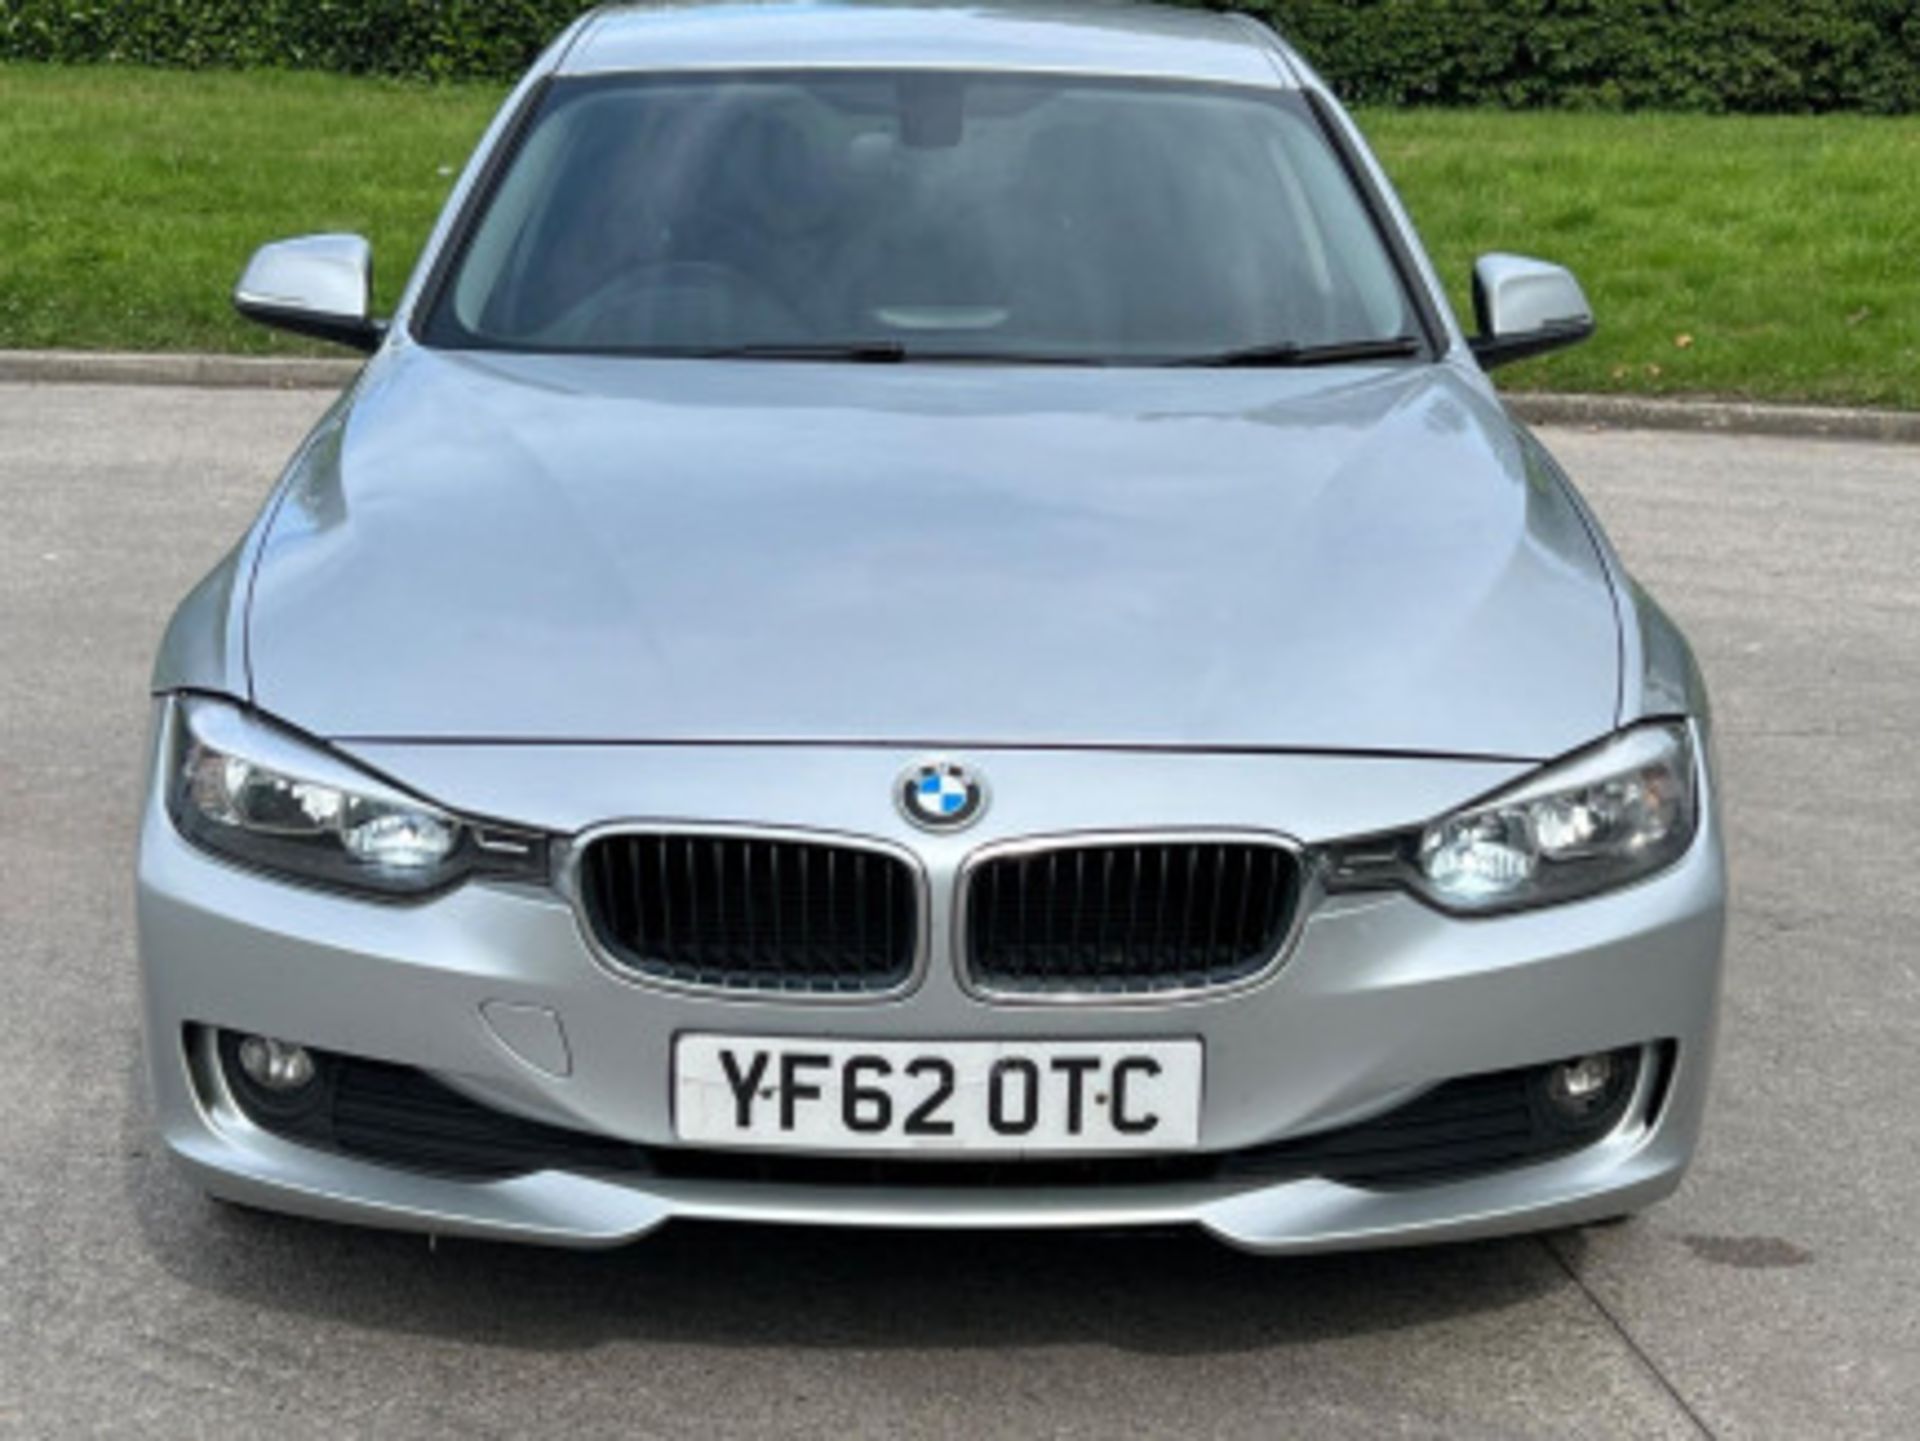 BMW 3 SERIES 2.0 DIESEL ED START STOP - A WELL-MAINTAINED GEM >>--NO VAT ON HAMMER--<< - Image 112 of 229